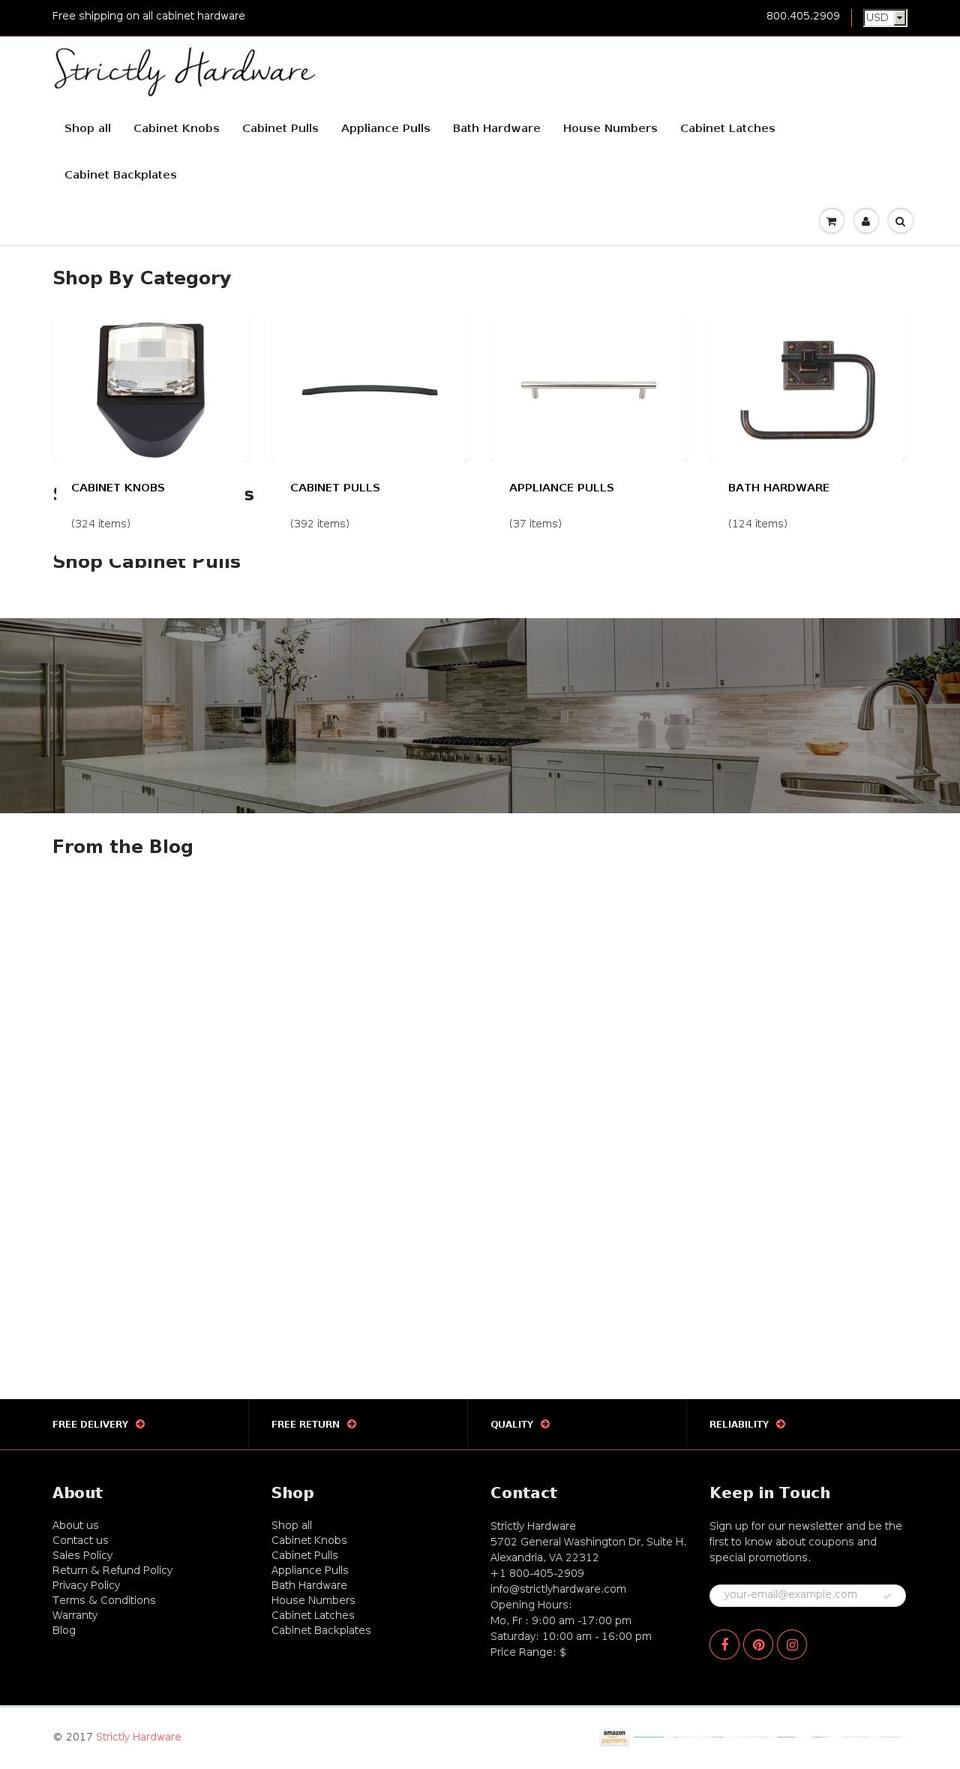 Portland Shopify theme site example strictlyhardware.com